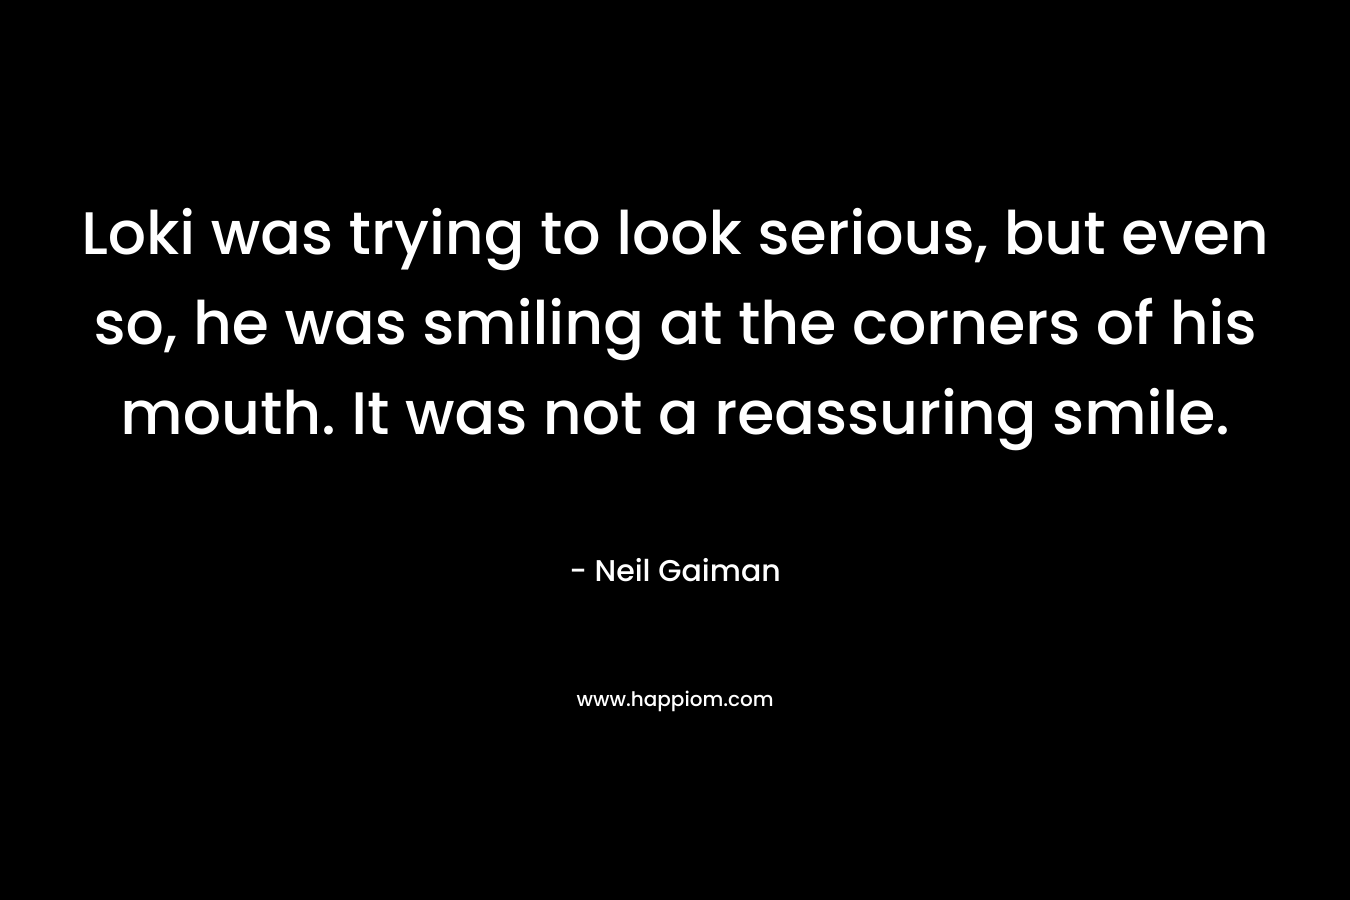 Loki was trying to look serious, but even so, he was smiling at the corners of his mouth. It was not a reassuring smile. – Neil Gaiman